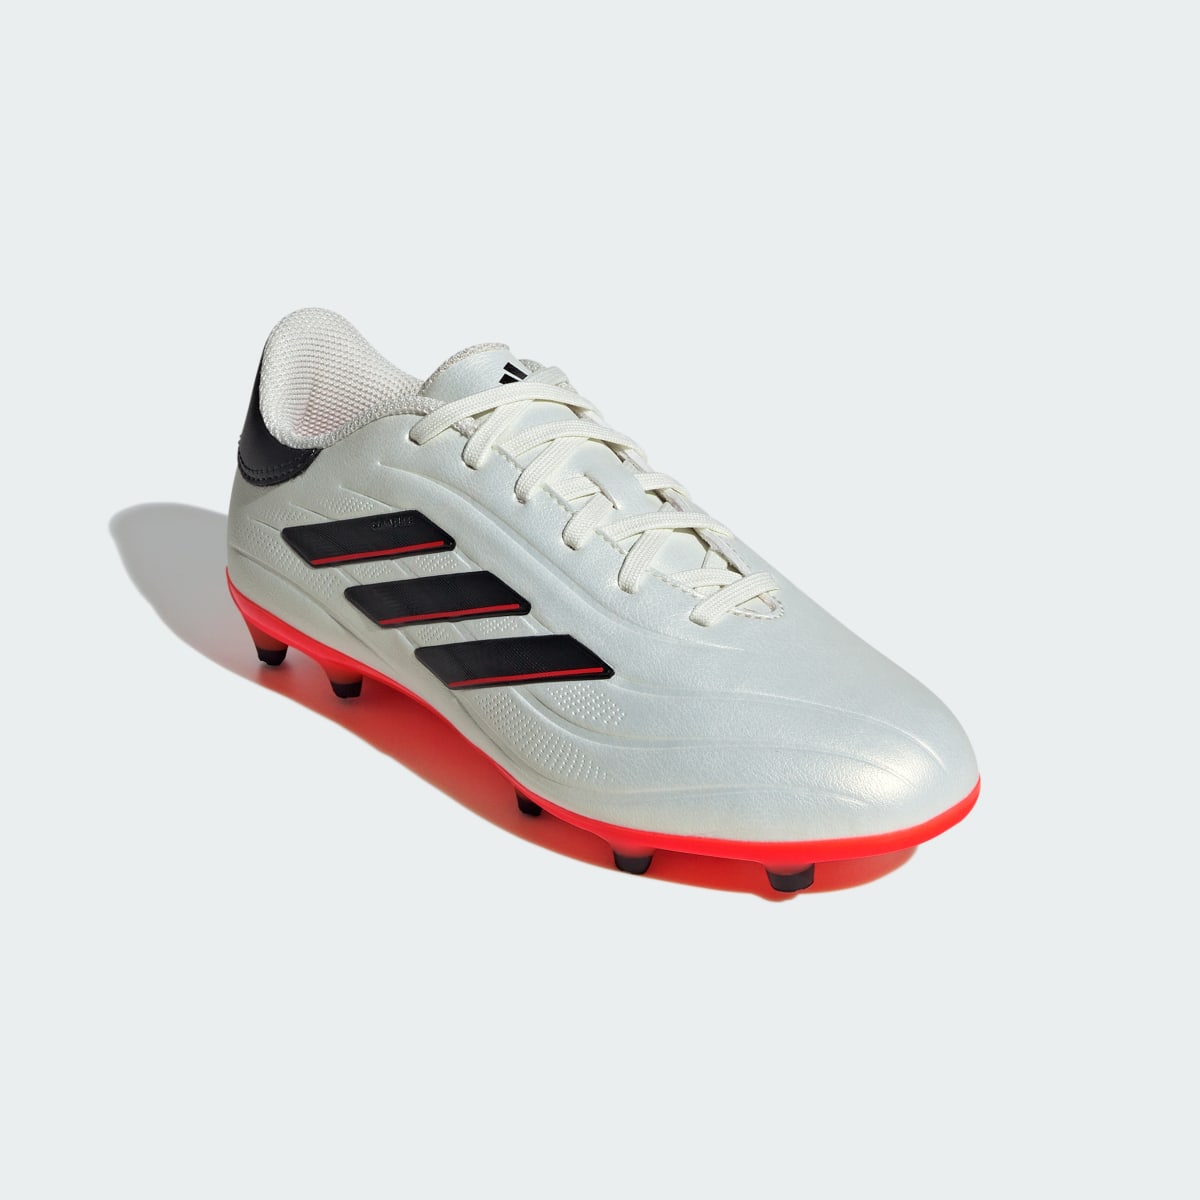 Adidas Copa Pure II League Firm Ground Boots. 5